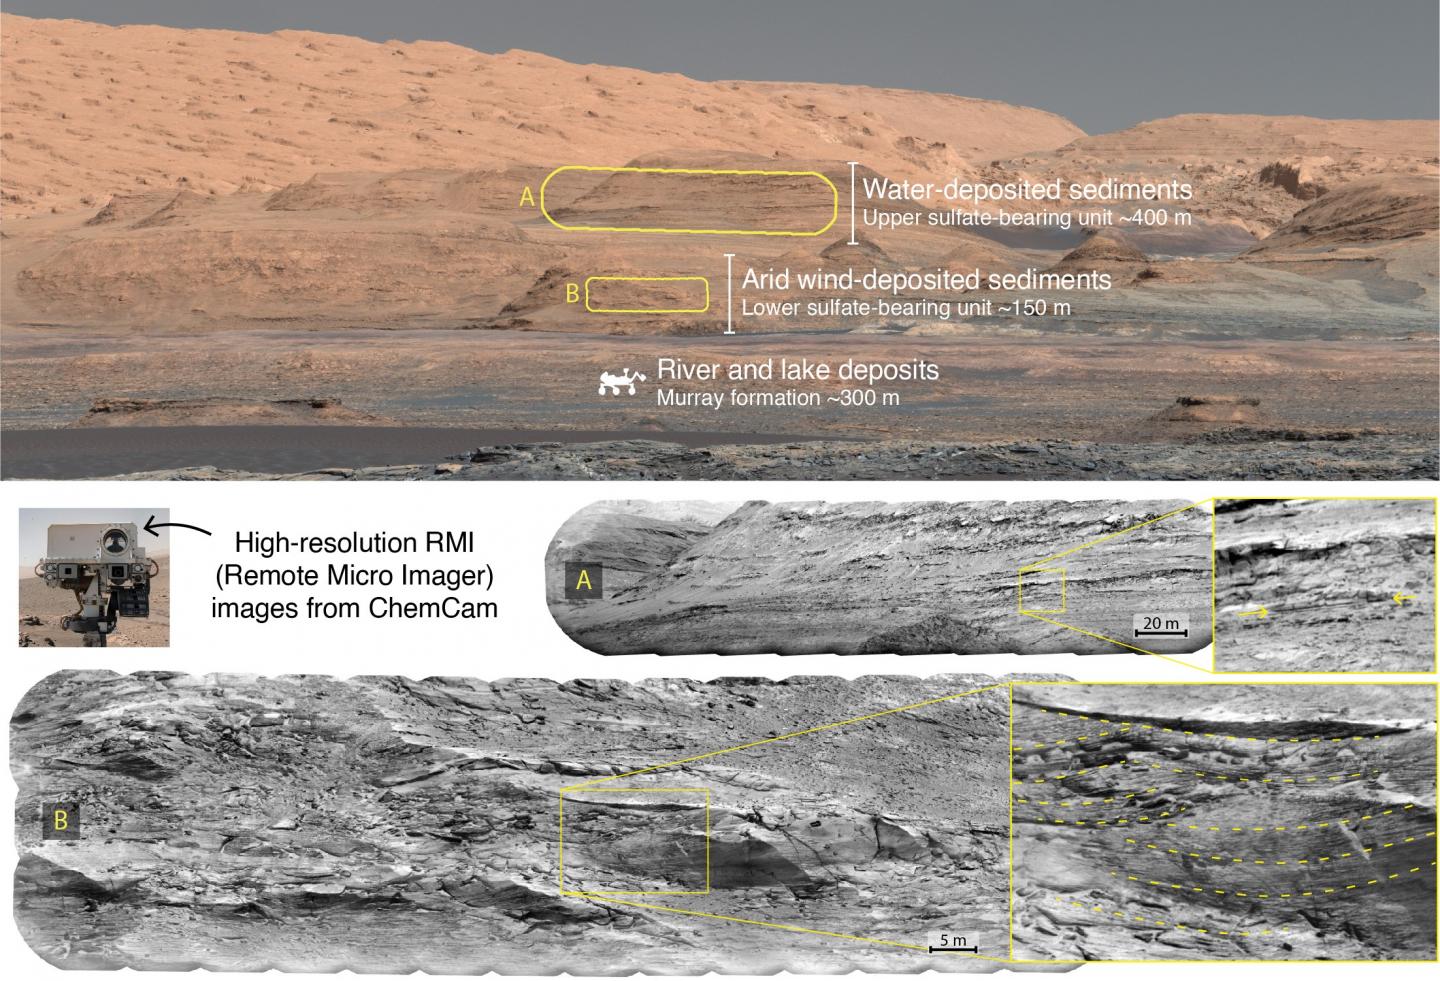 Mars had dry and wet eras and dried up for good 3 billion years ago